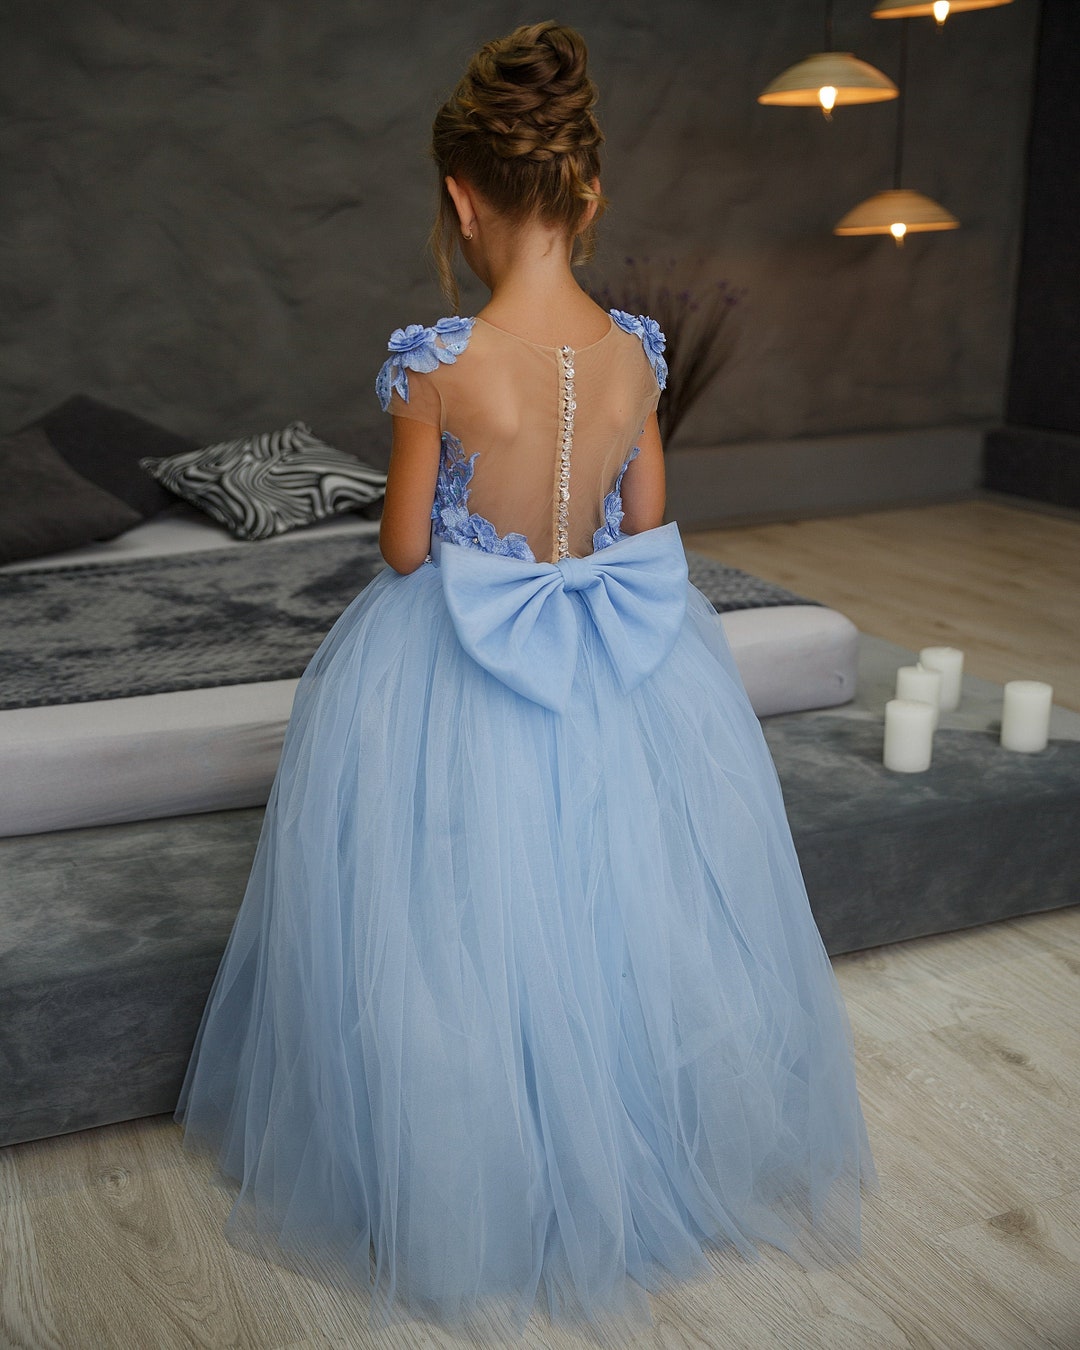 Dazzling Party Wear Gowns for Little Girls - Baby Couture India